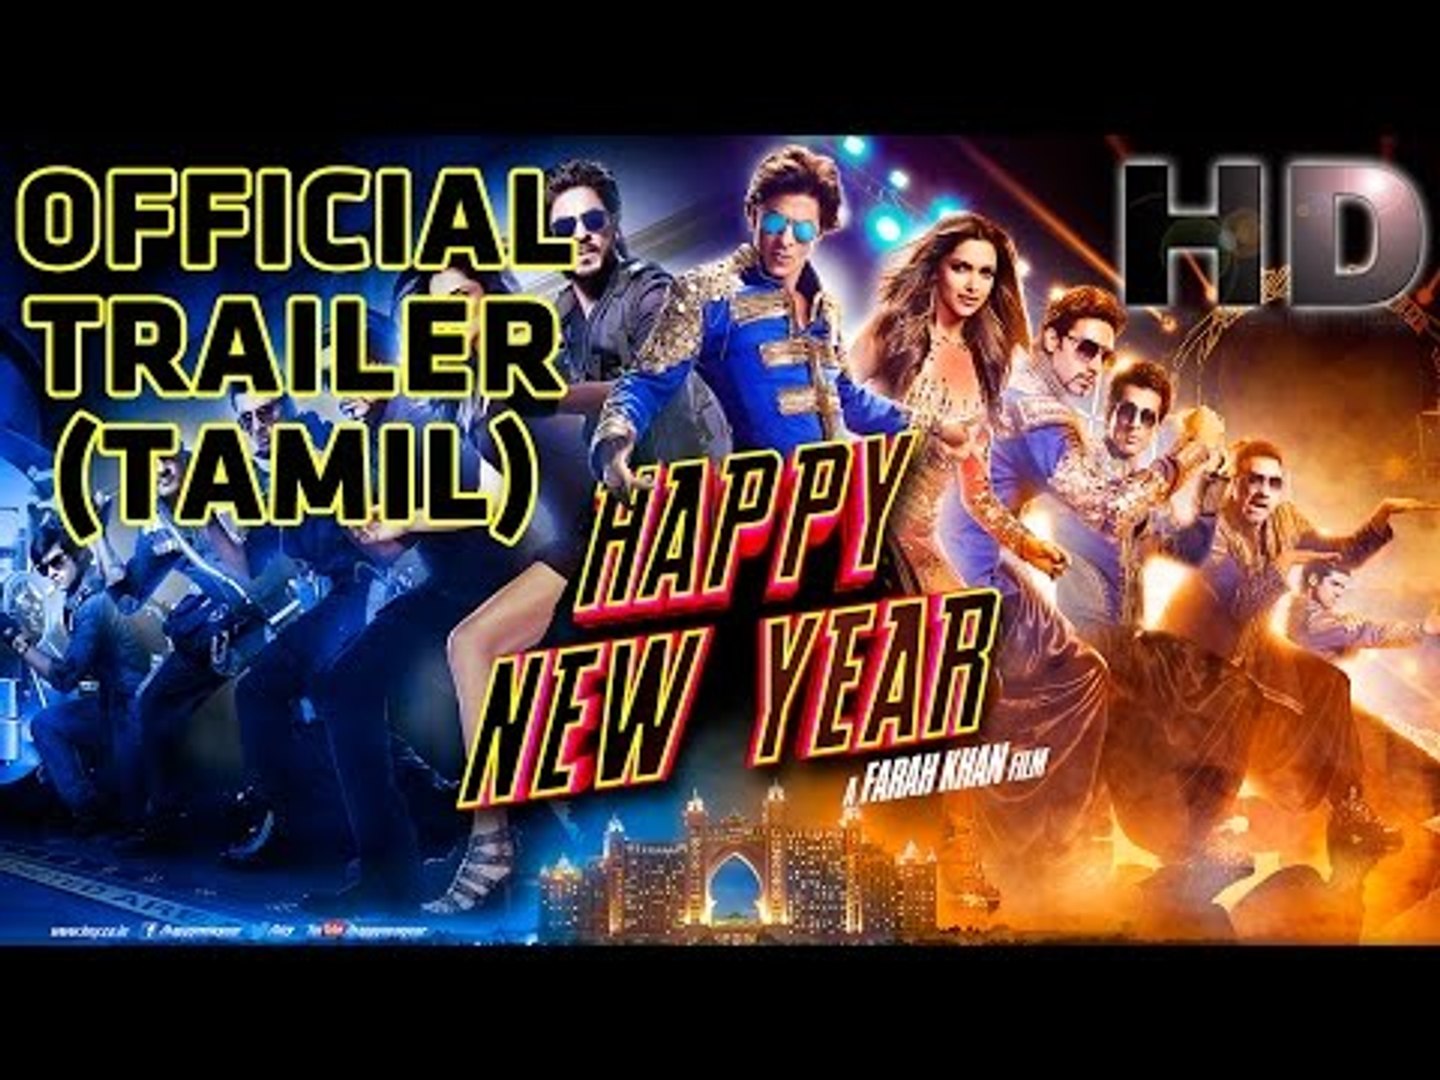 Happy new year movie in tamil